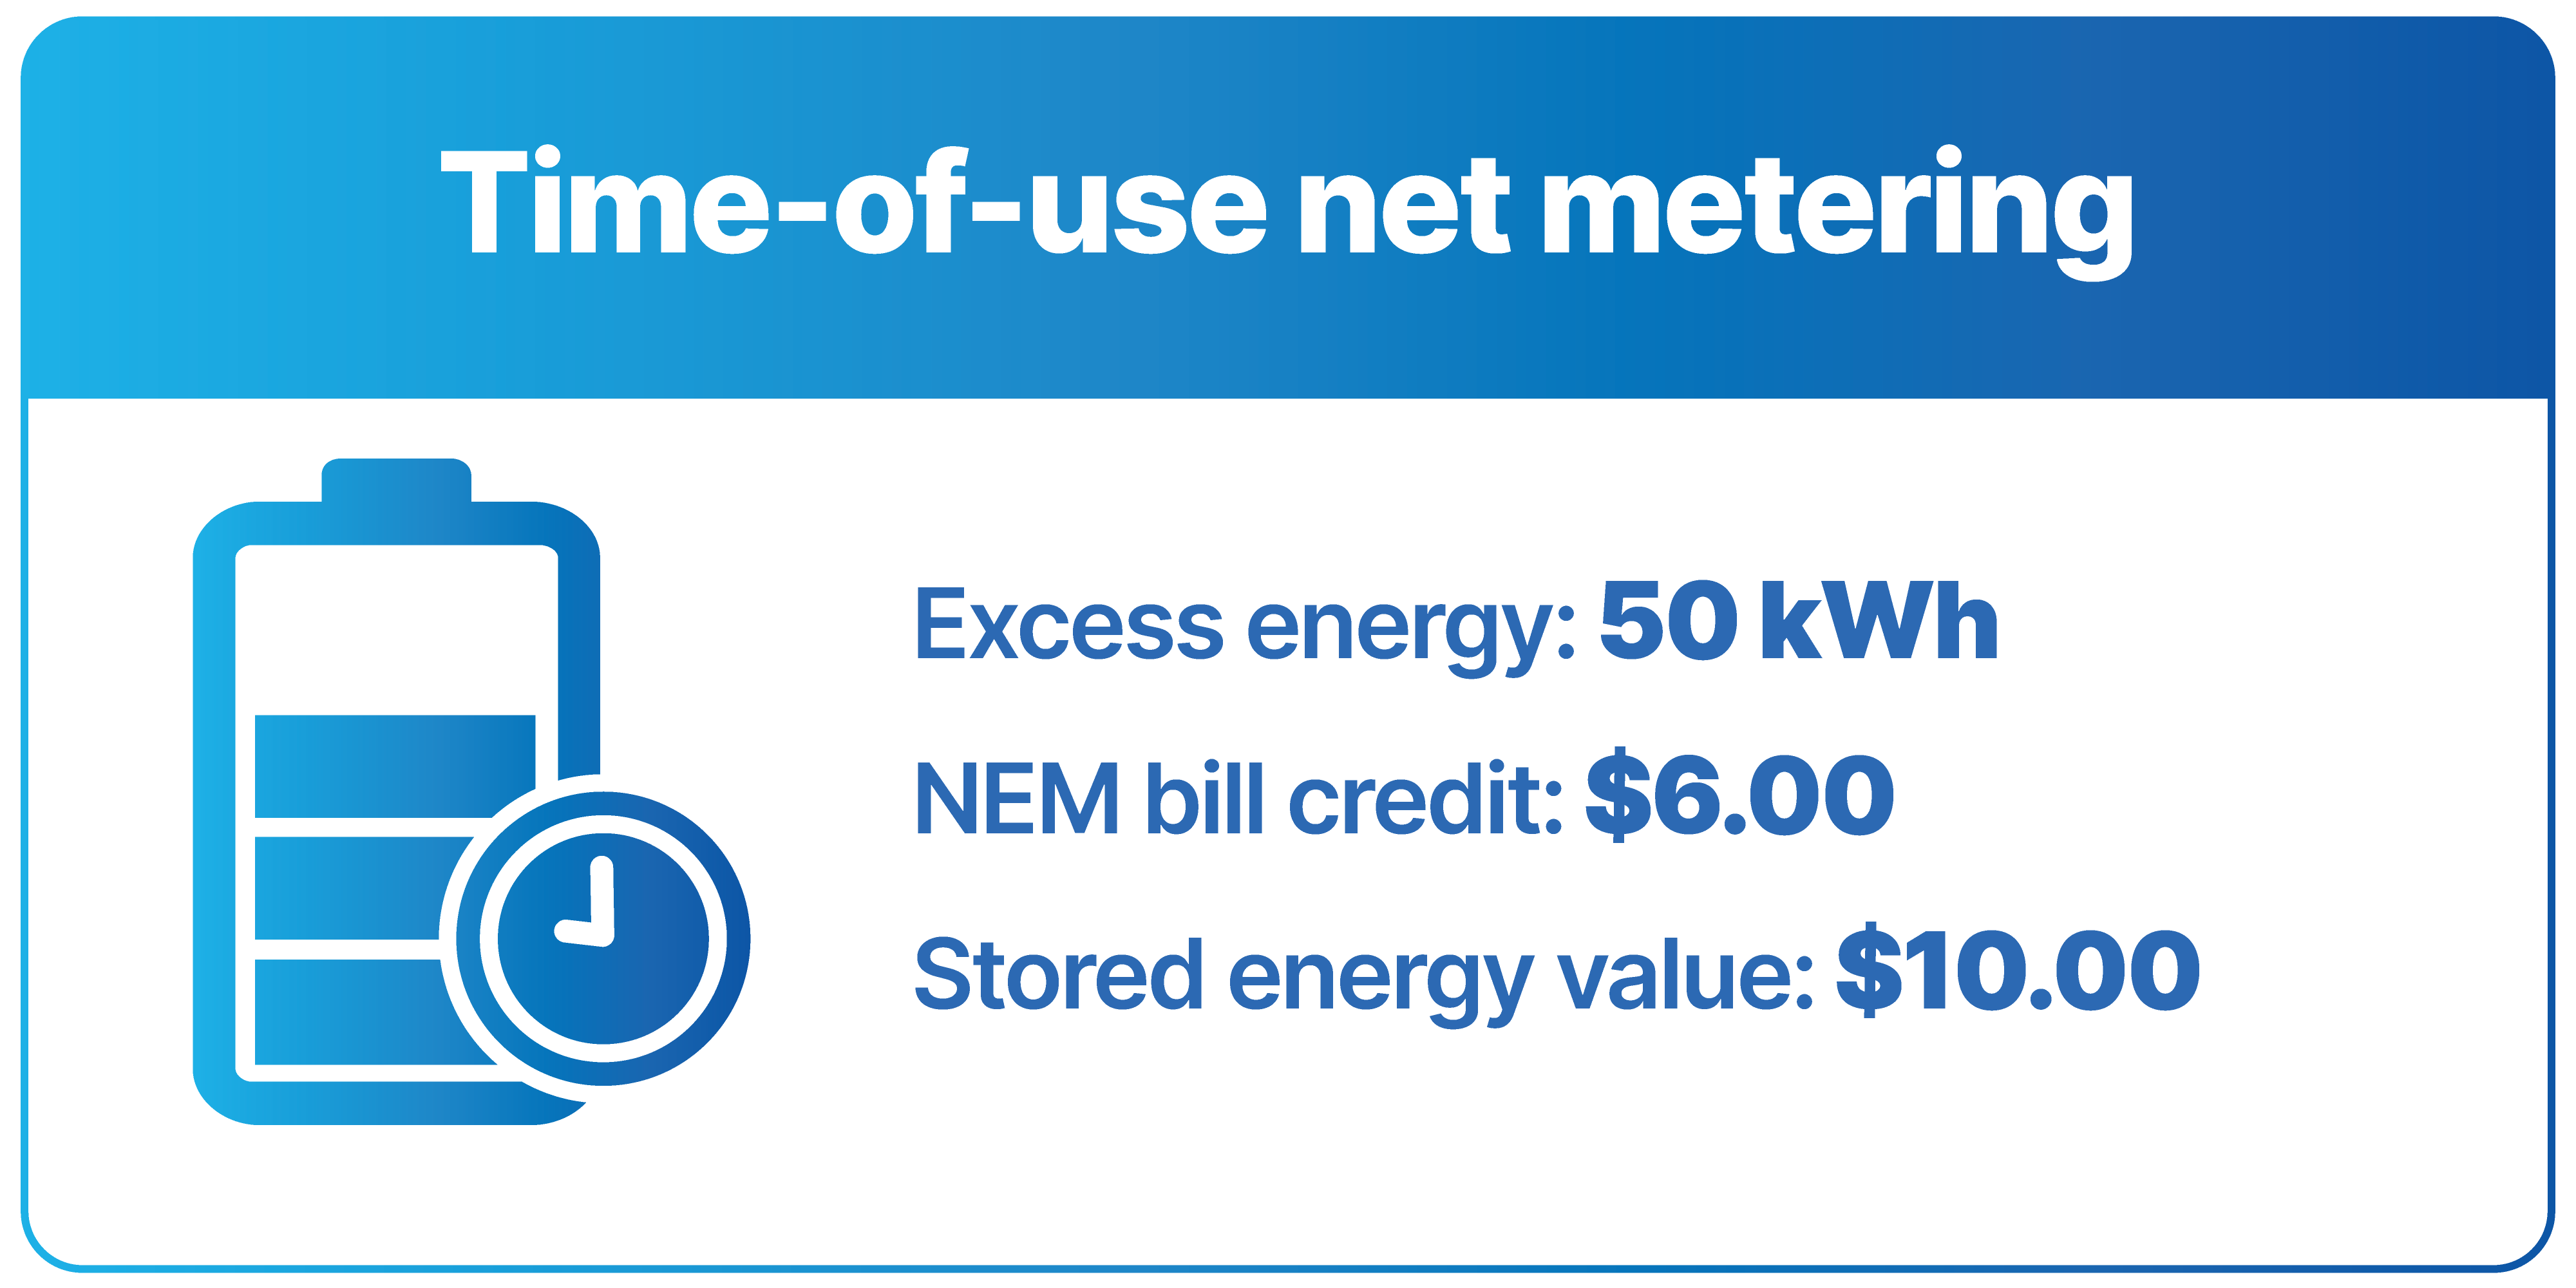 In this example, 50 kWh of energy sold to the utility through time-of-use net metering would be worth $6.00, 50 kWh of stored energy used later in the day would be worth $10.00. Batteries save more money in areas with time of use rates.